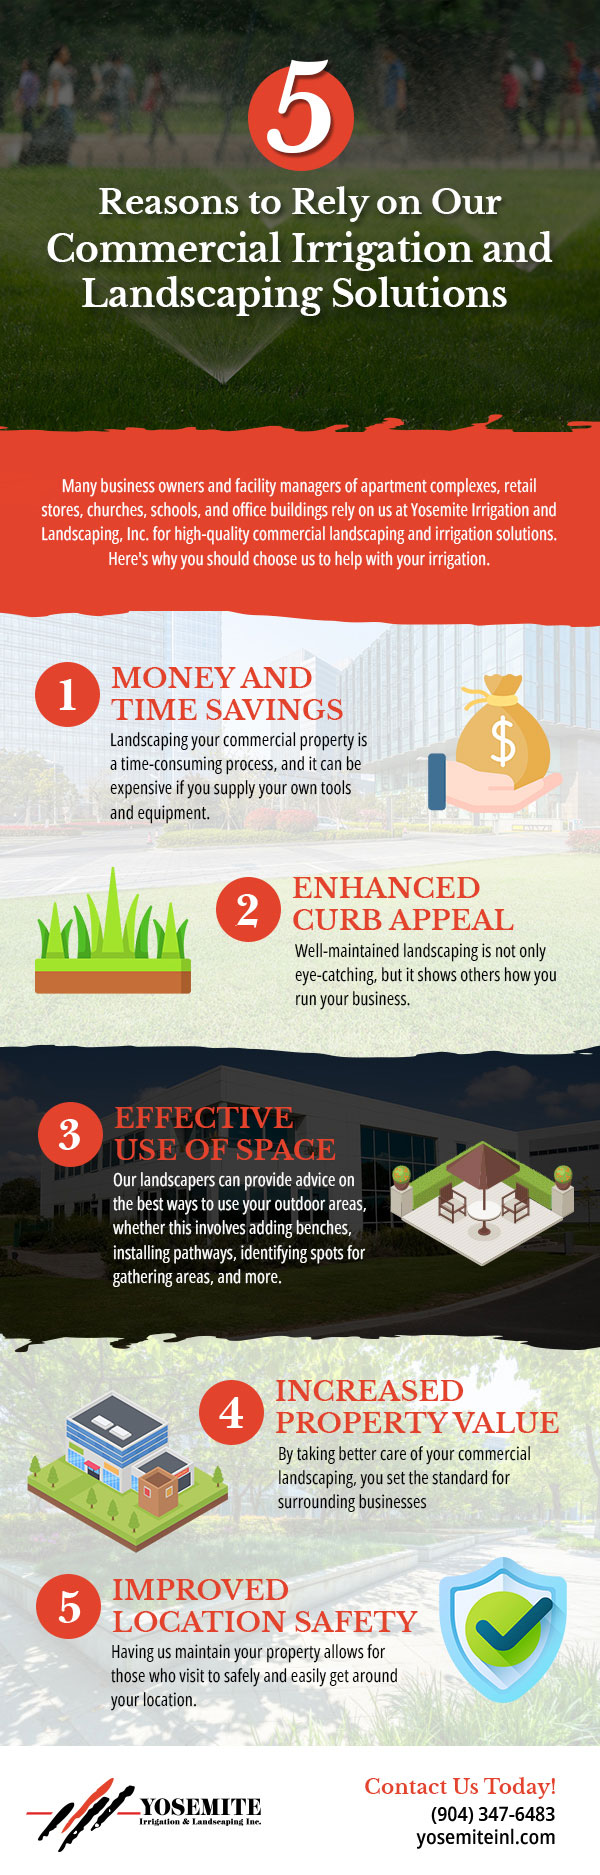 5 Reasons to Rely on Our Commercial Irrigation and Landscaping Solutions 